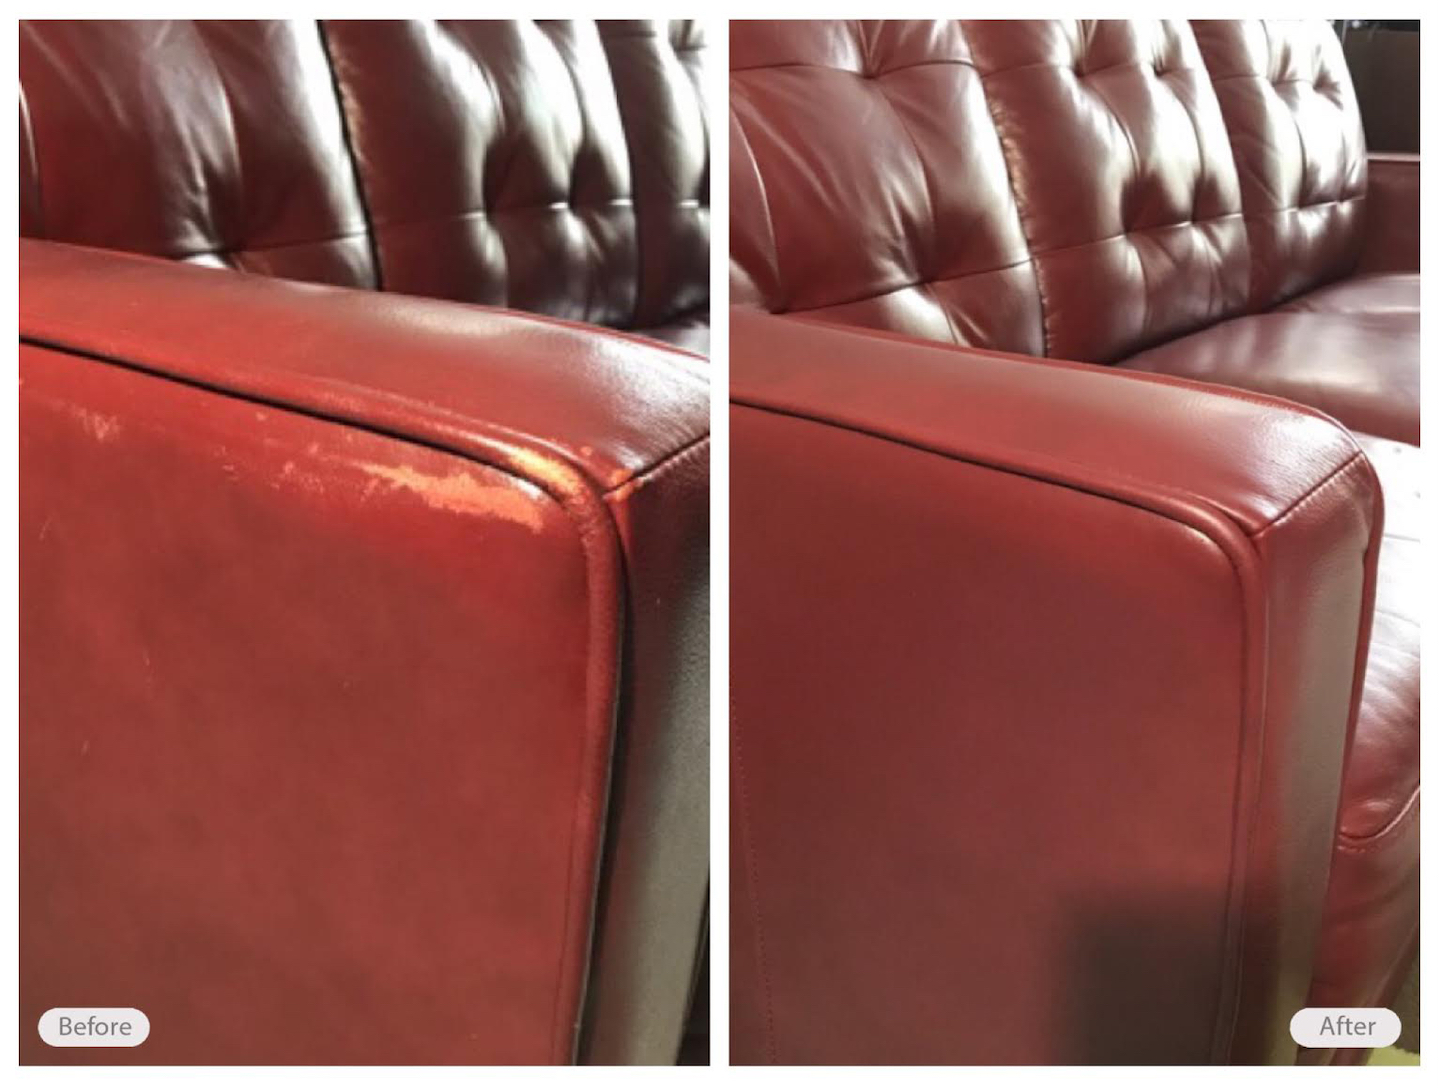 Moving damage on leather furniture is no problem to restore